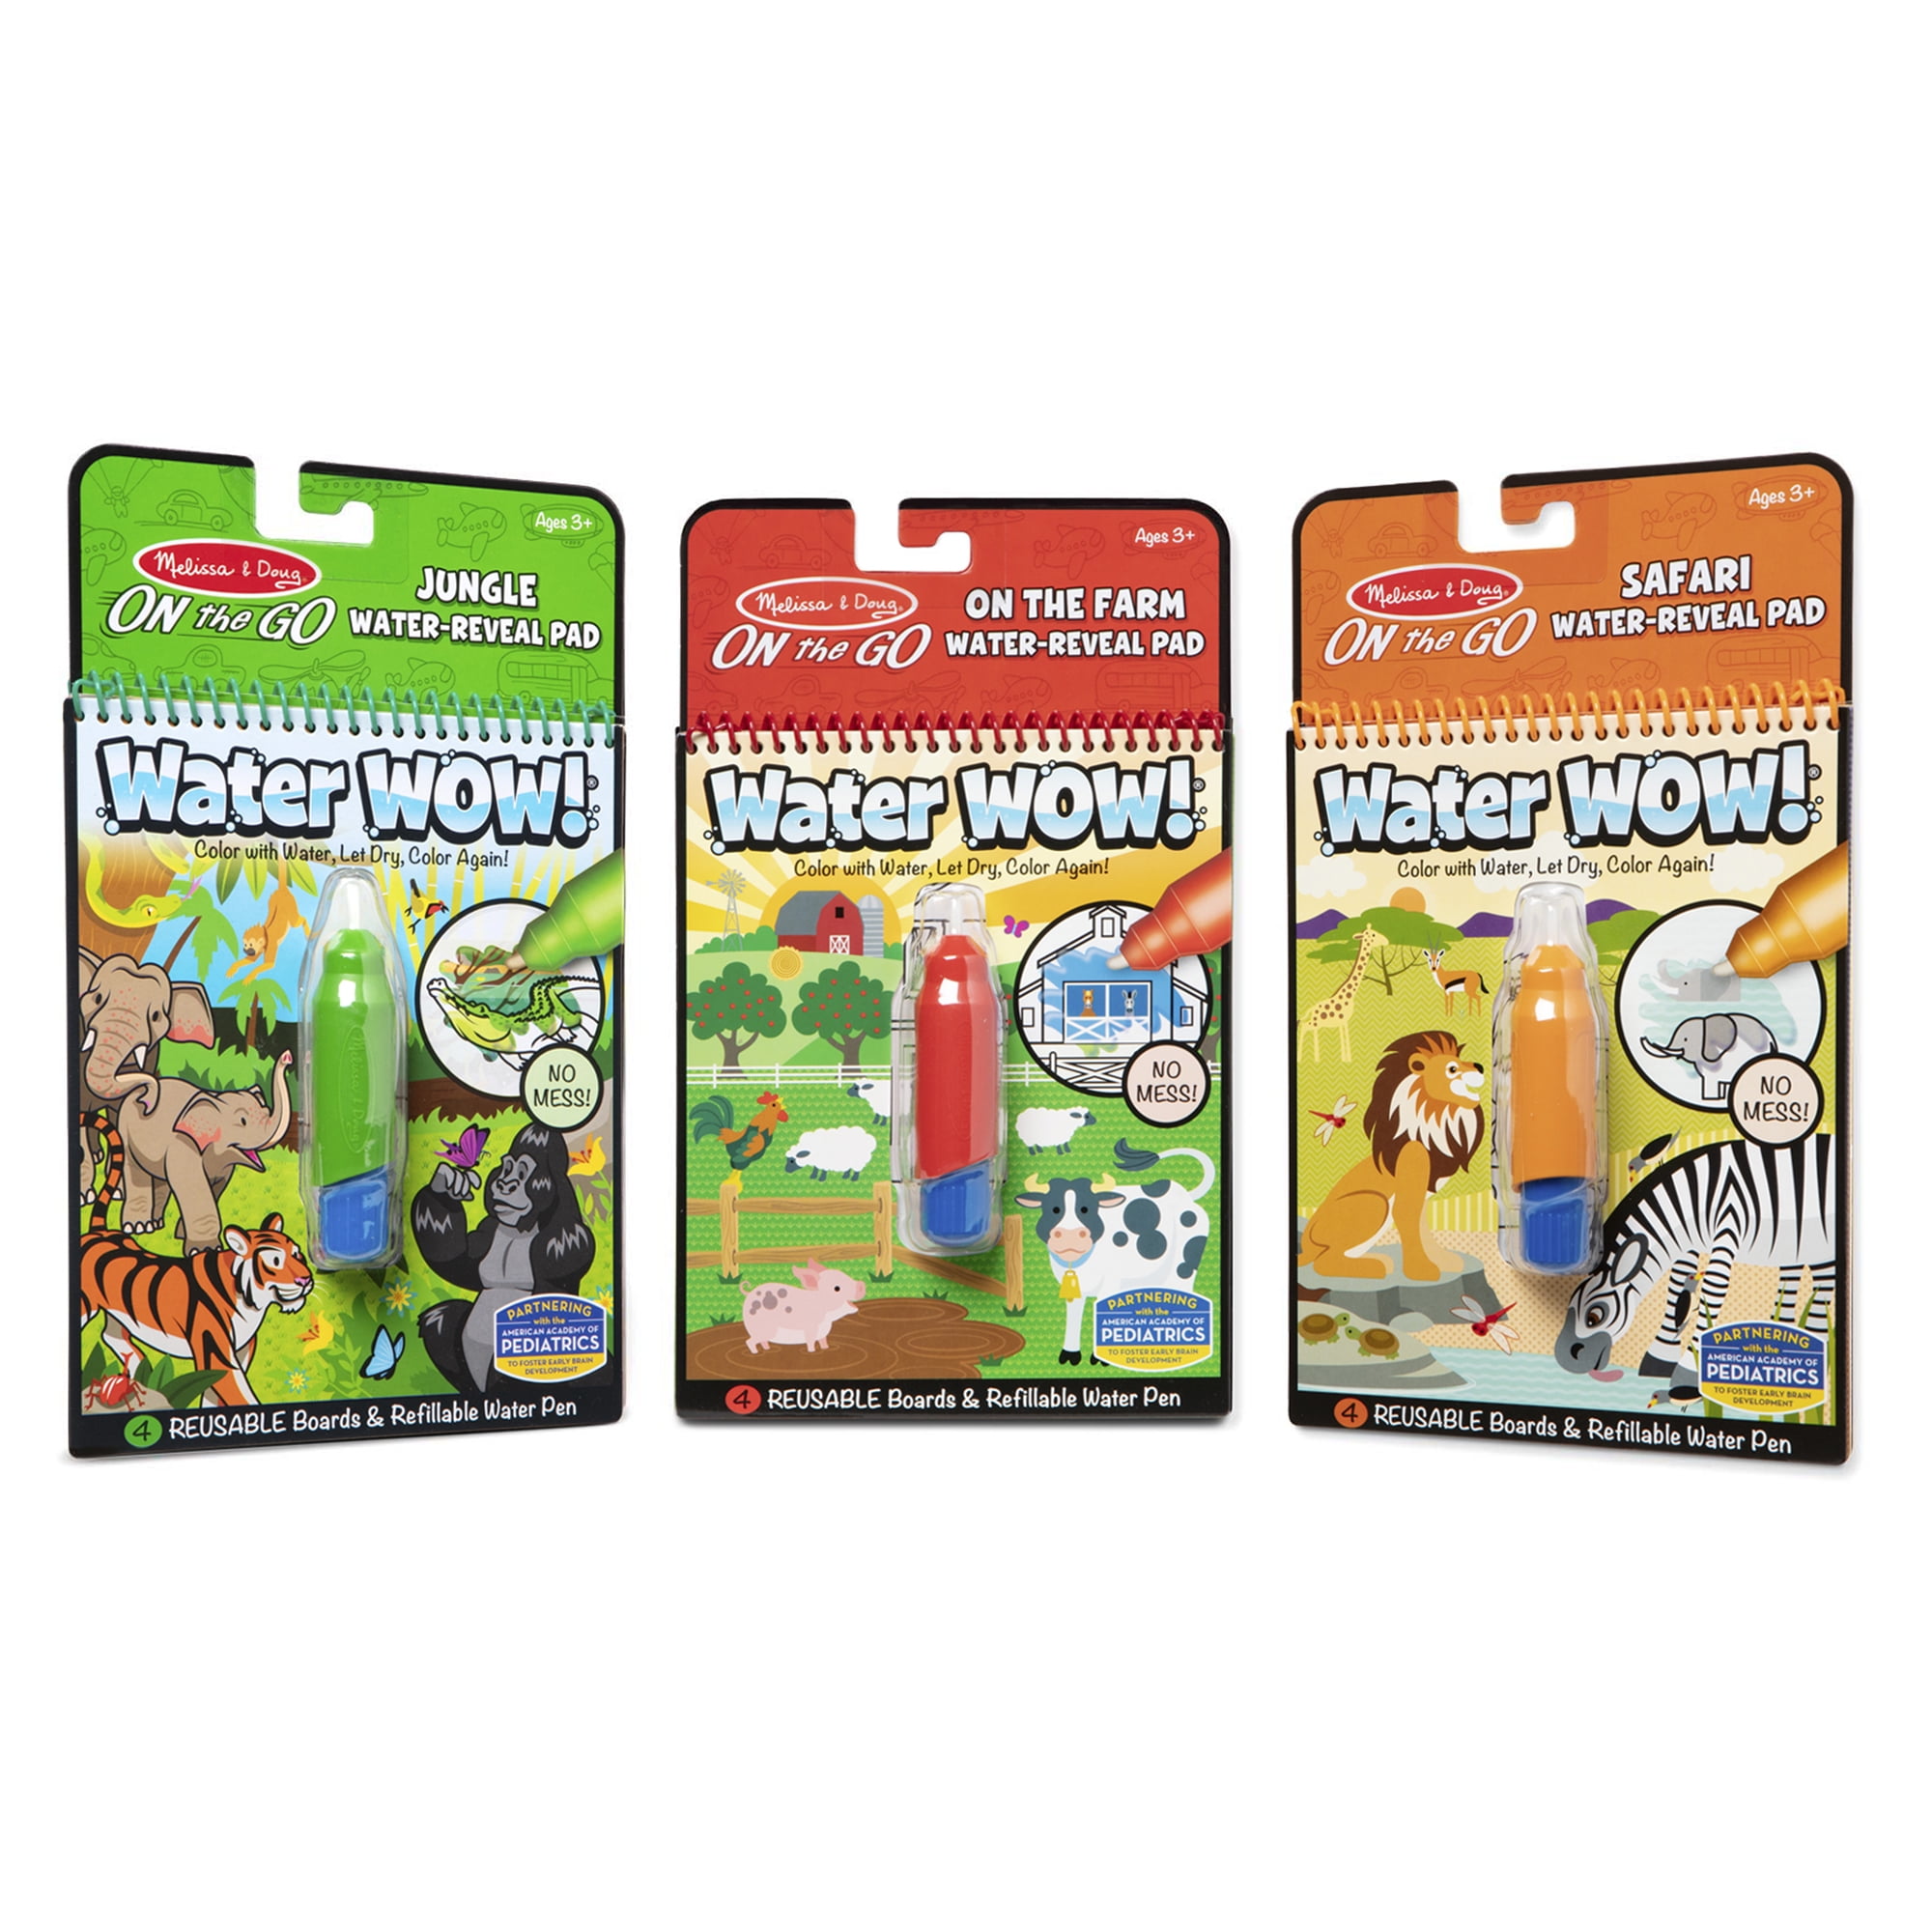 AMACO wow amazing all drawings accessories set